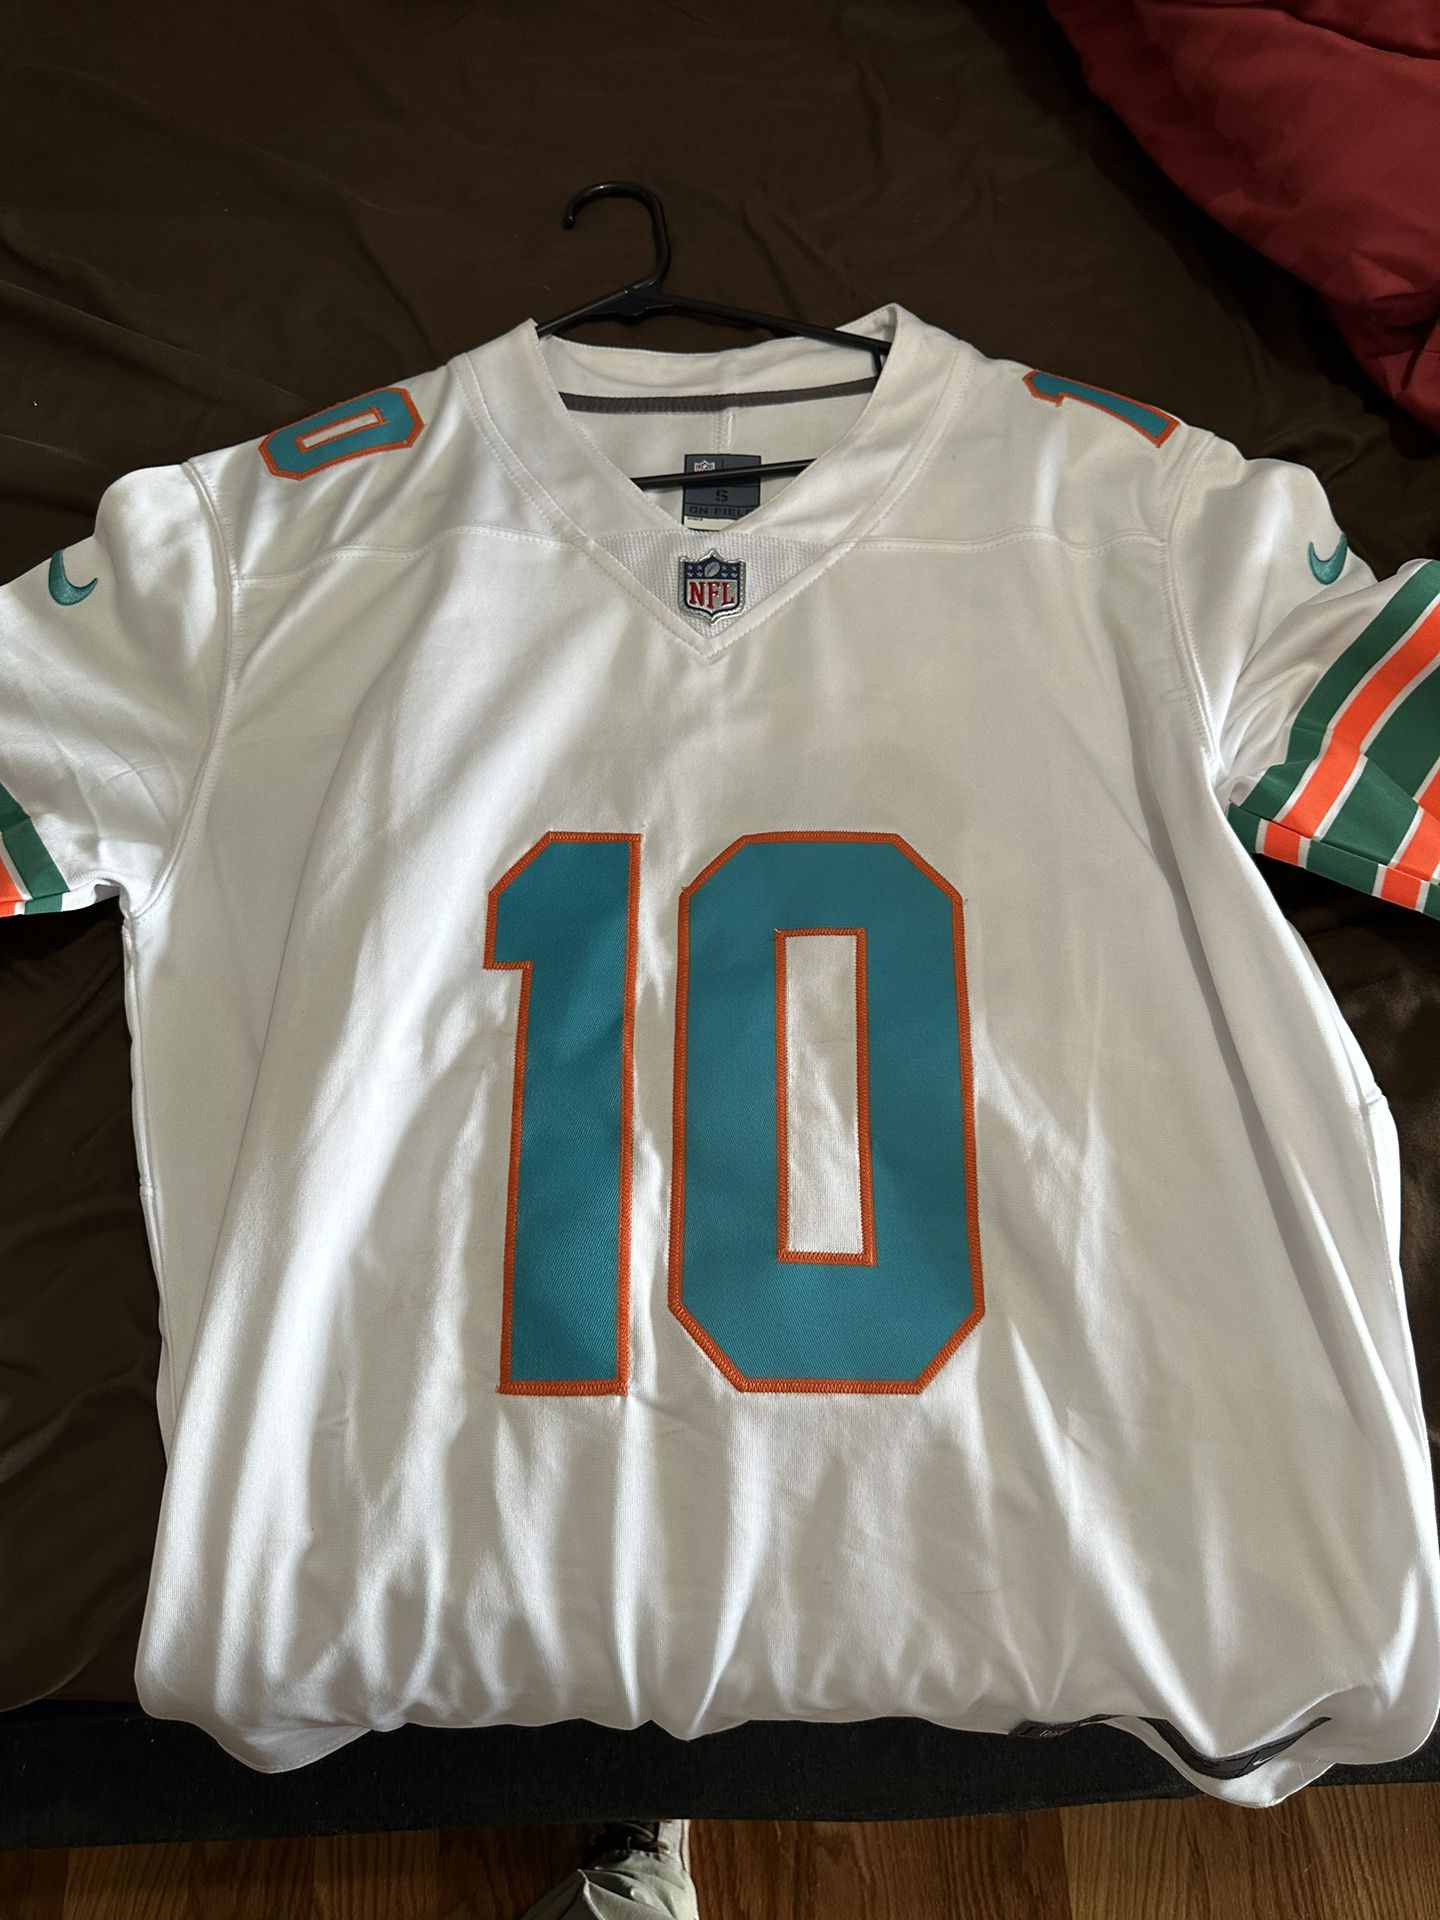 Miami Dolphins Jersey for Sale in Carol City, FL - OfferUp